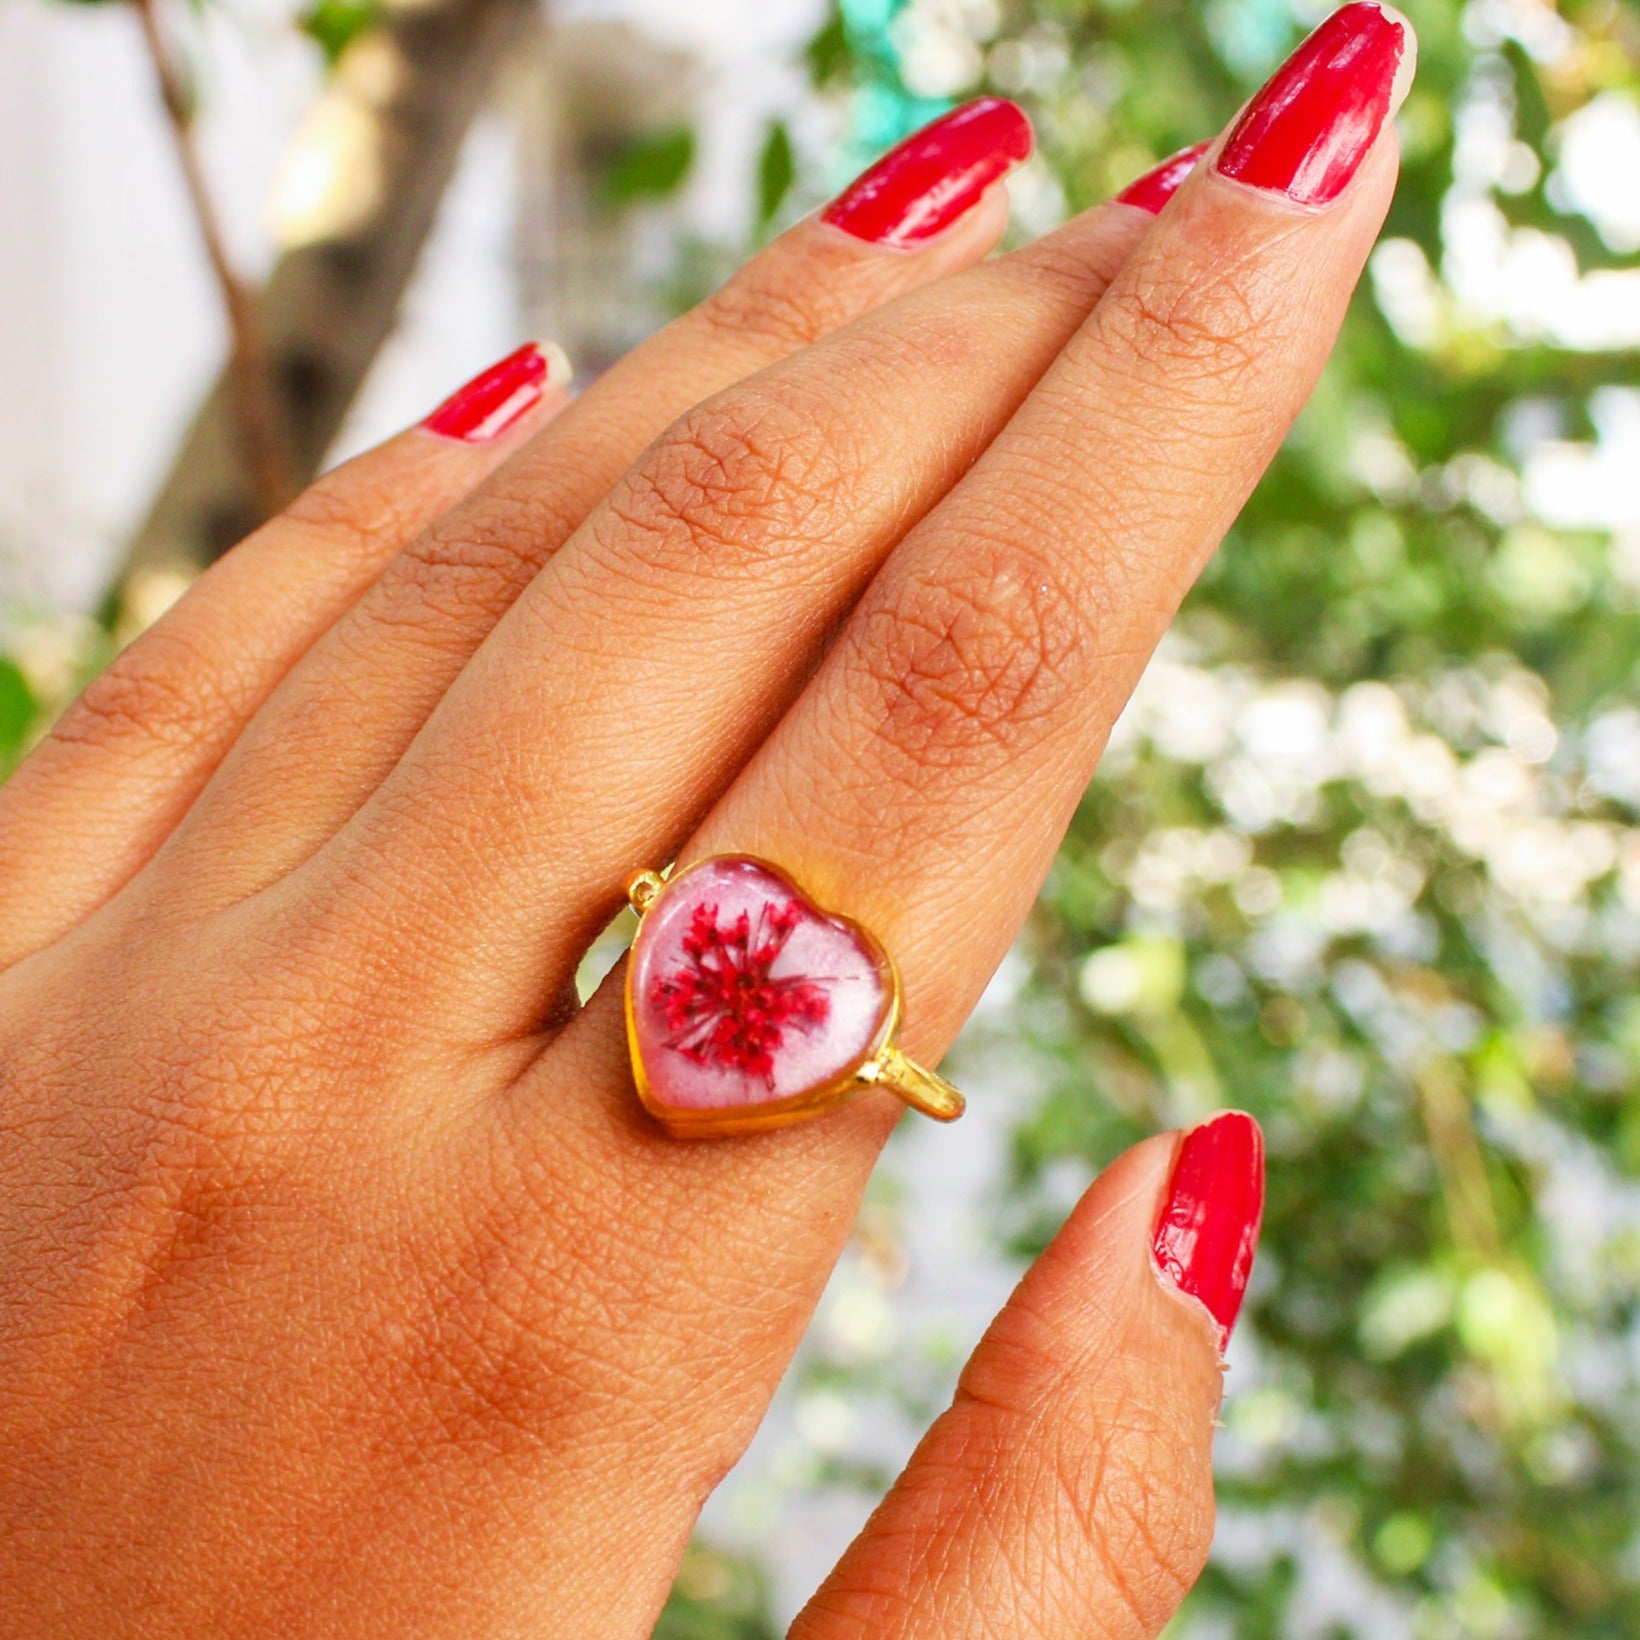 Sundrop Symphony Botanical Ring with Real Sundrop Flowers